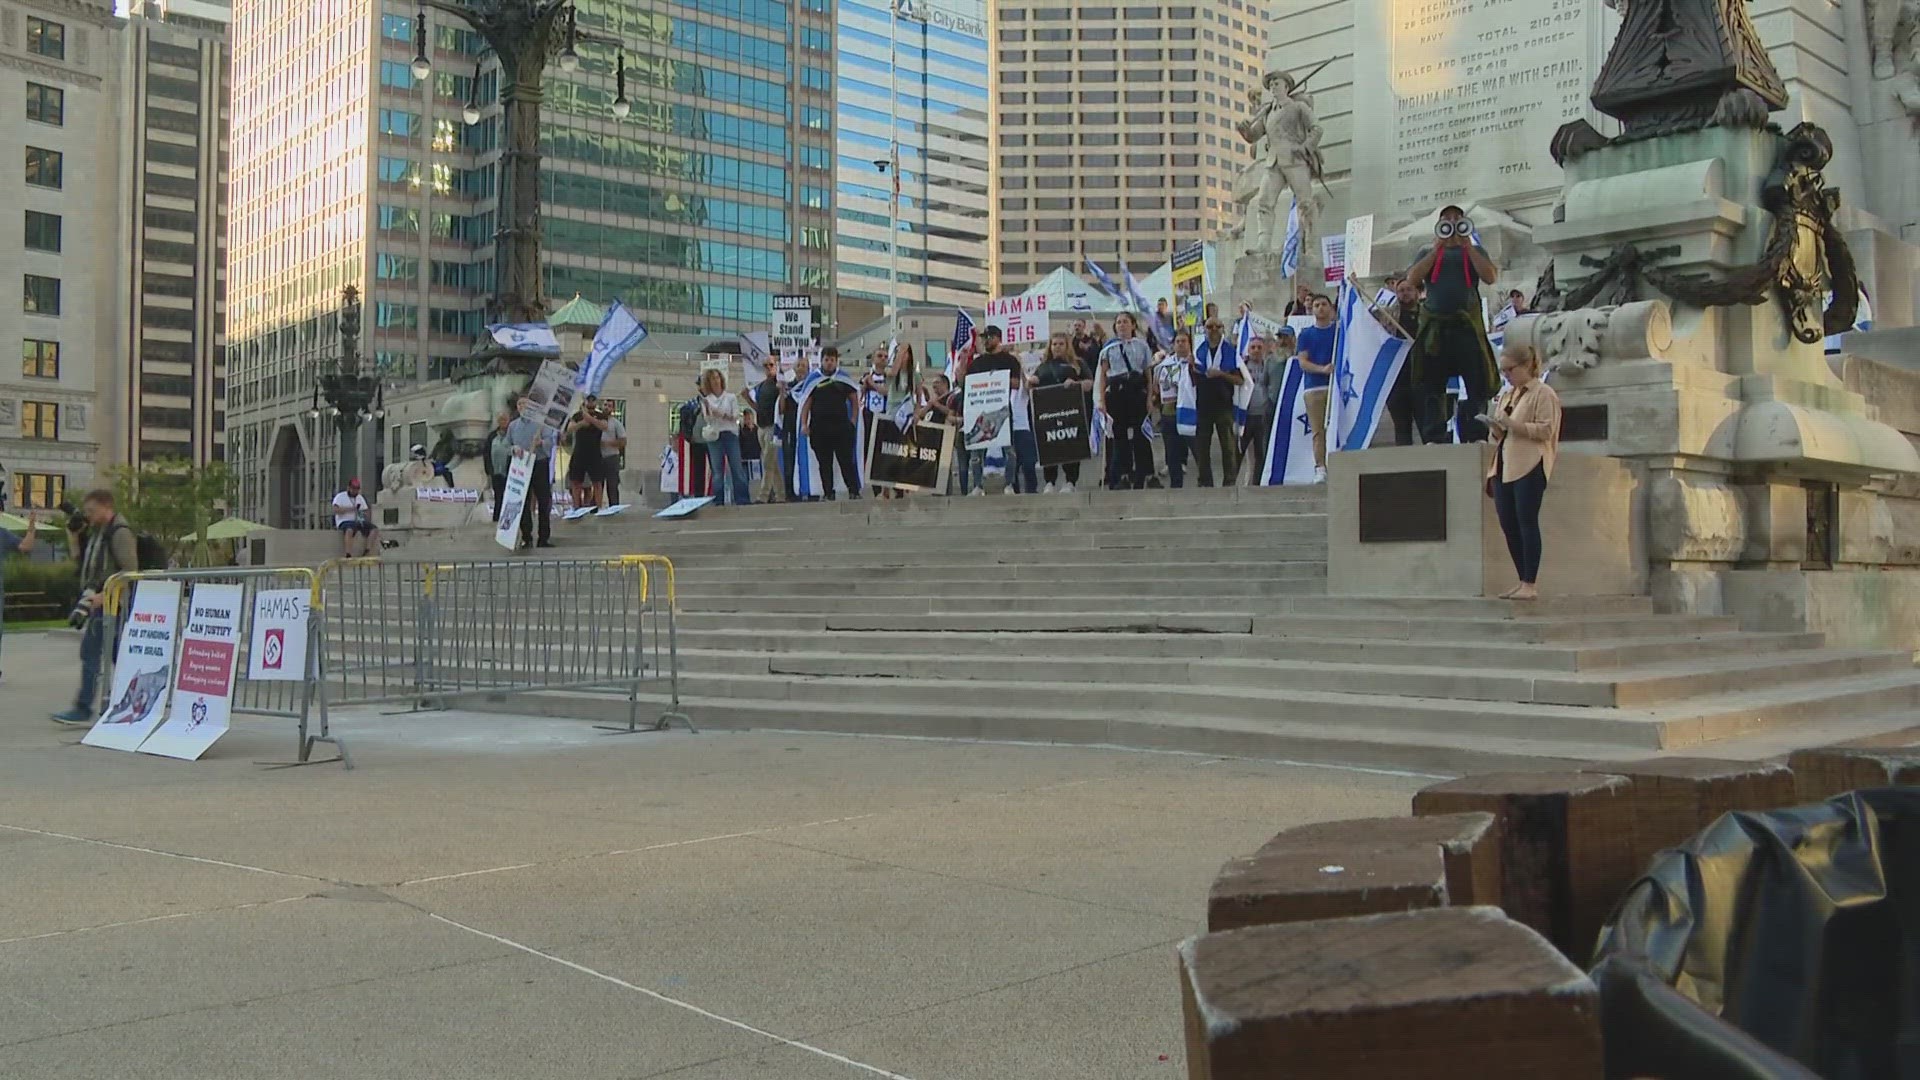 The demonstrations on Monument Circle Thursday drew hundreds of people.